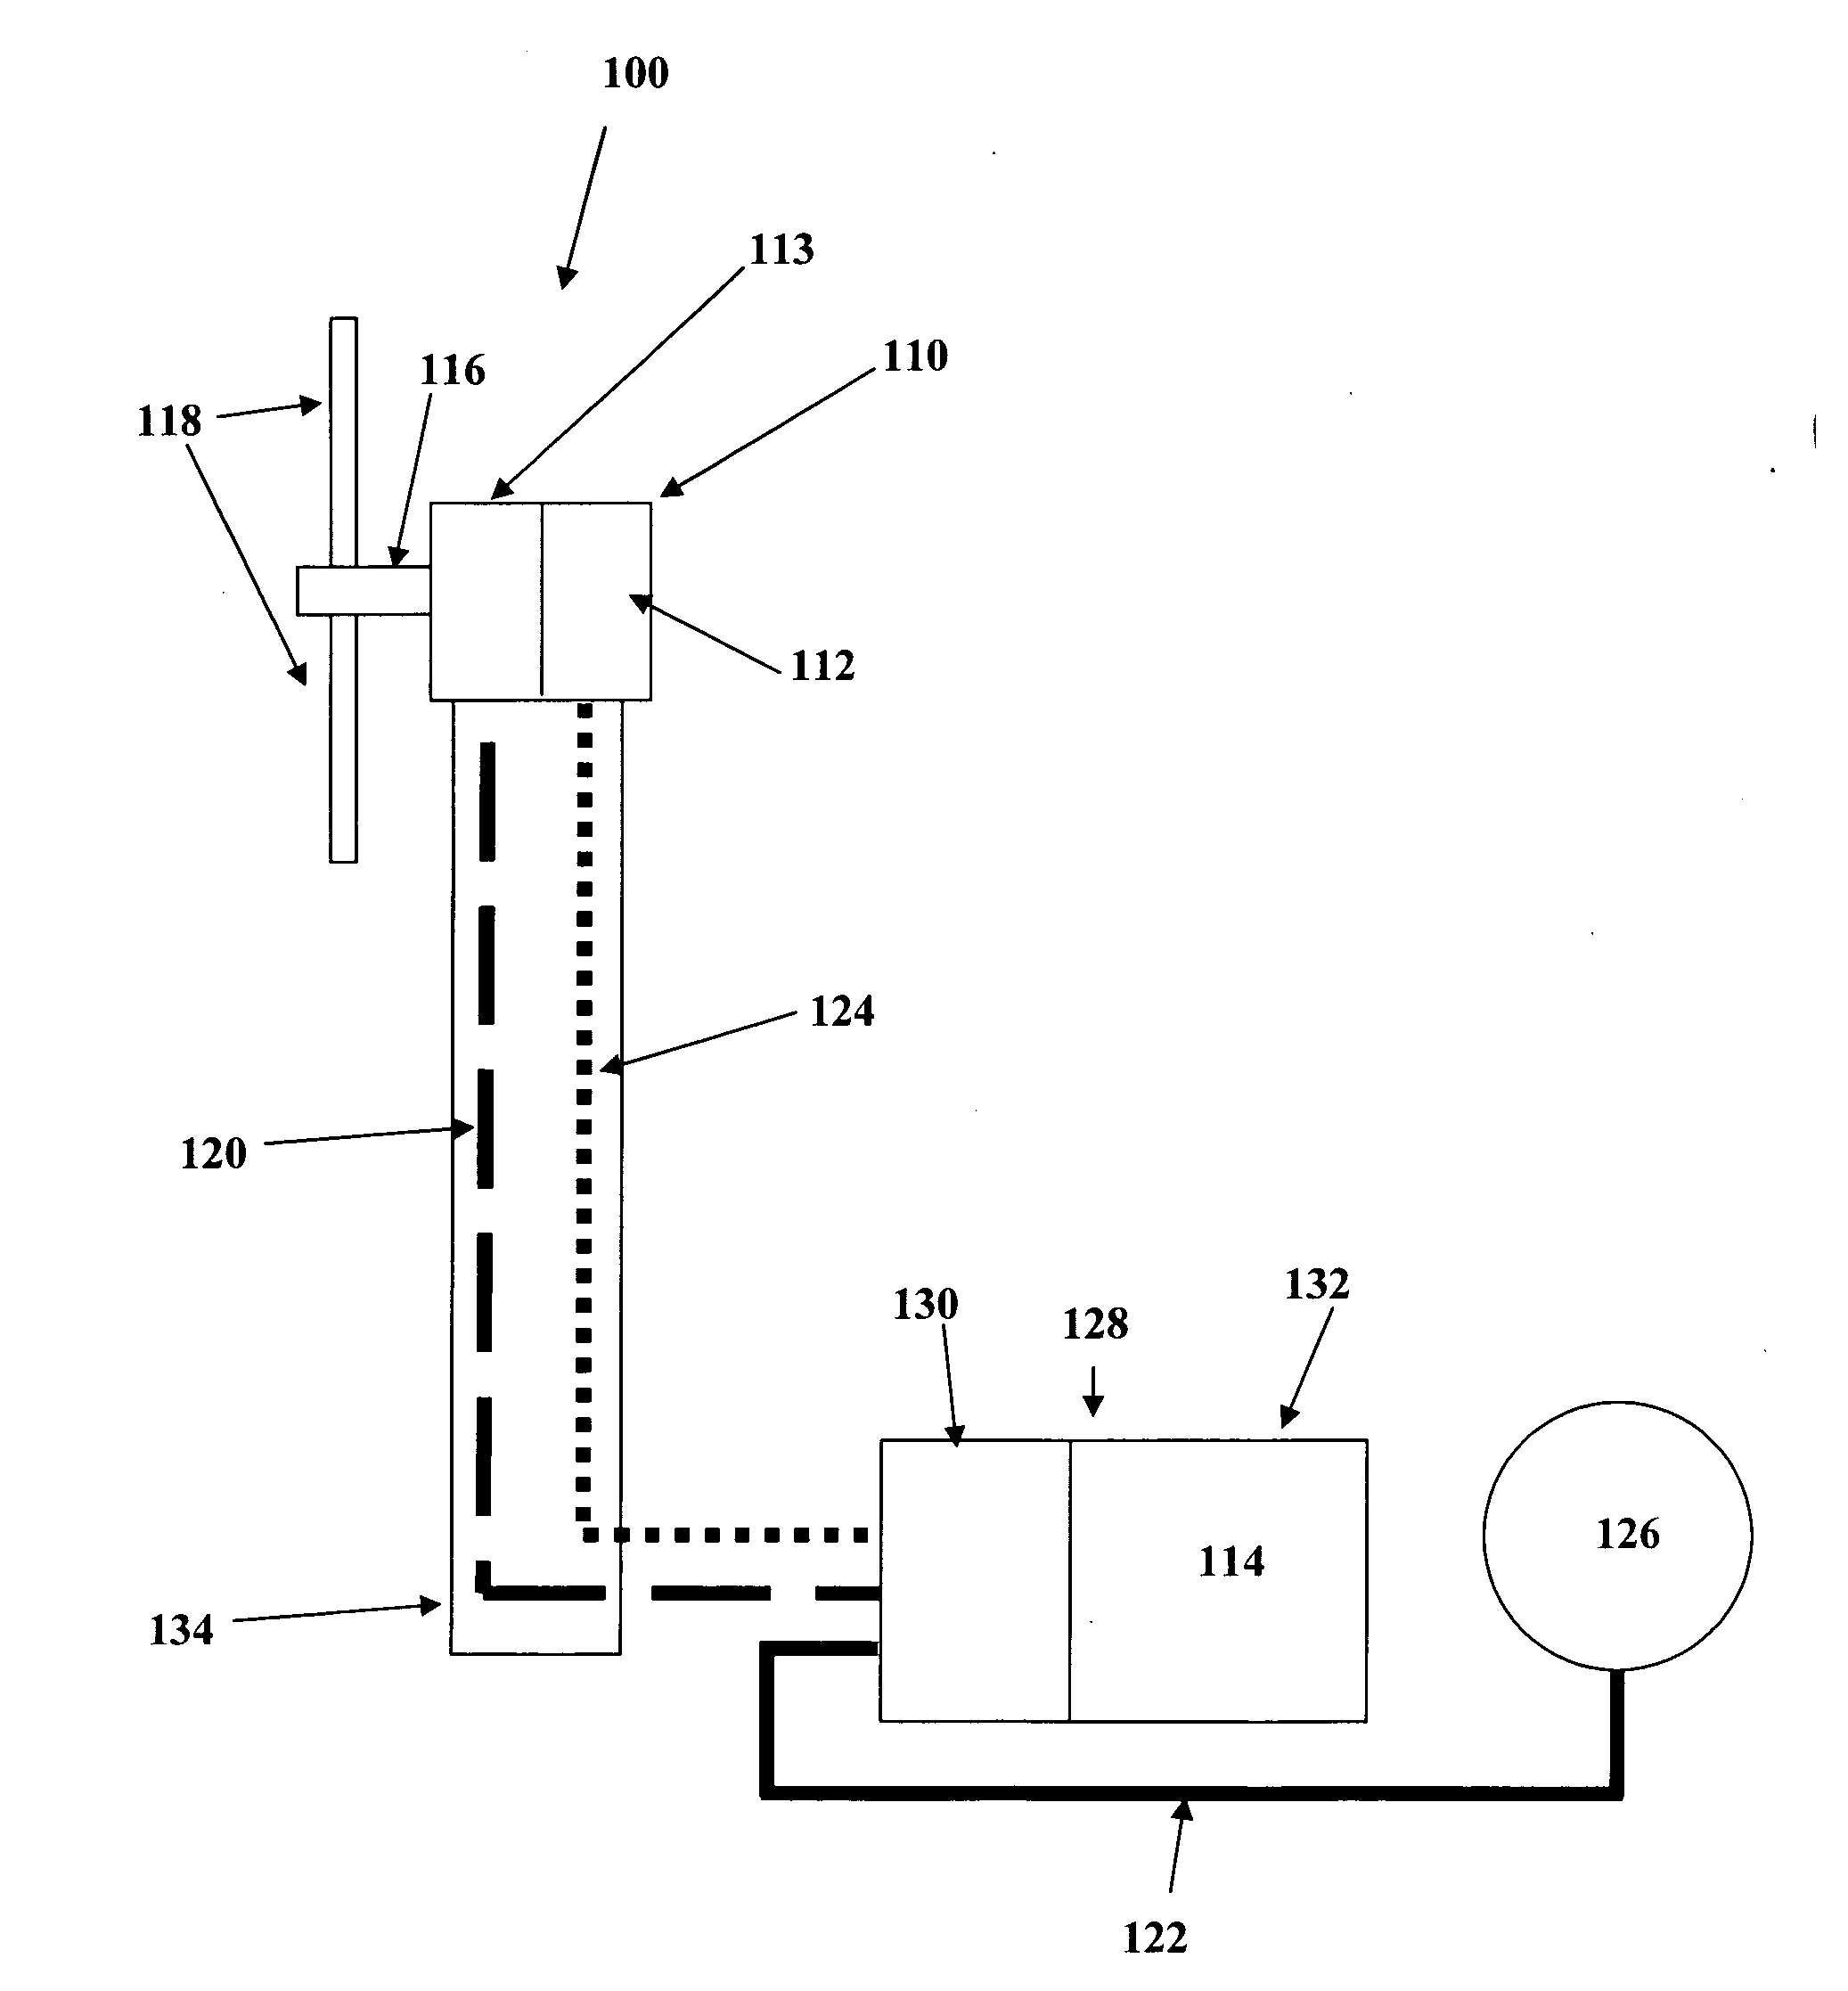 Auxiliary power supply for a wind turbine